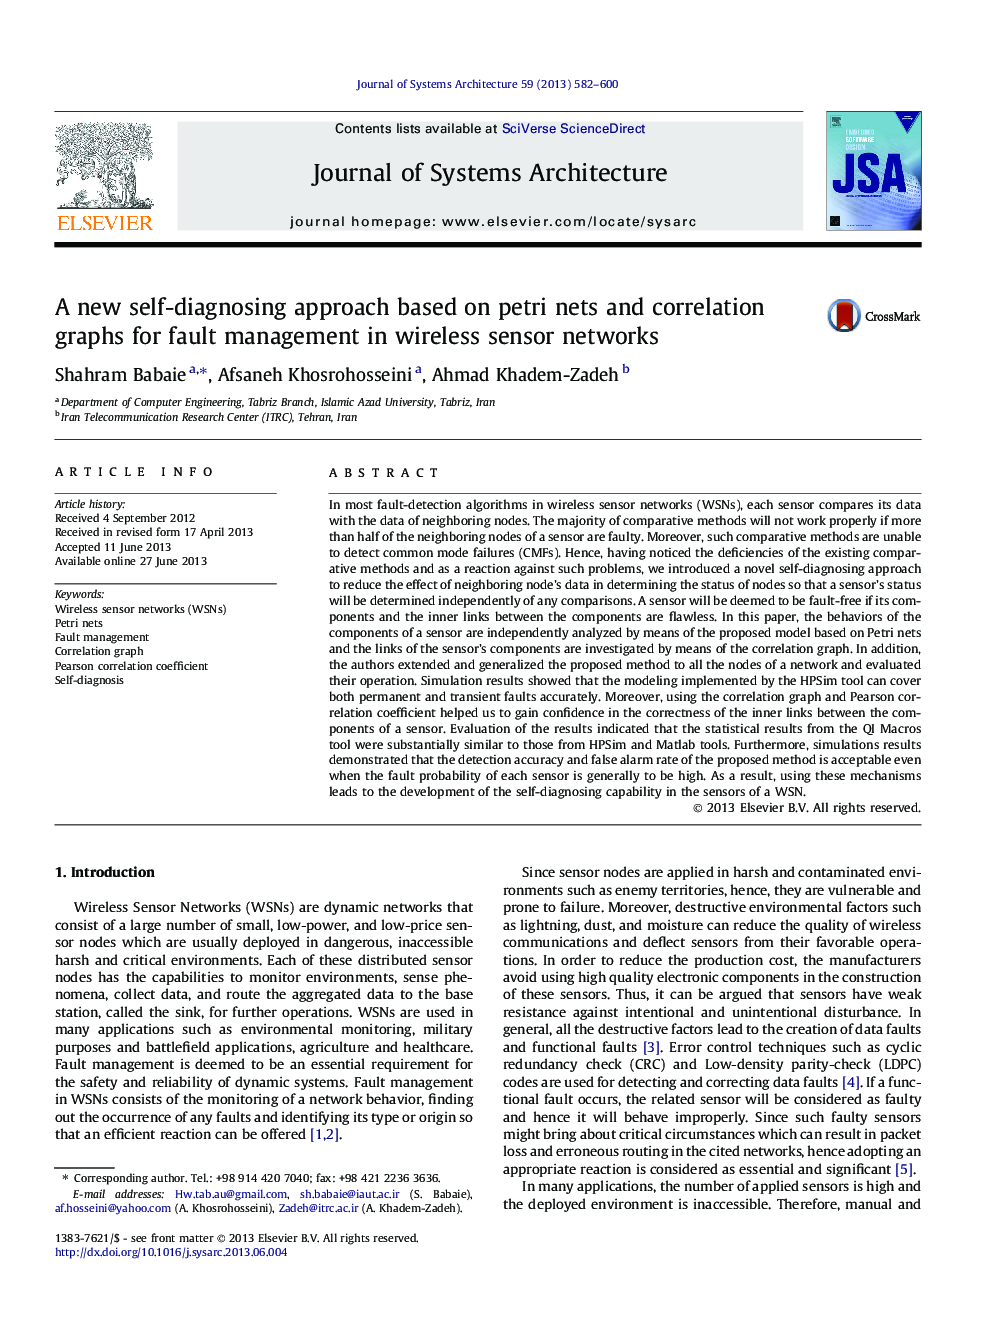 A new self-diagnosing approach based on petri nets and correlation graphs for fault management in wireless sensor networks